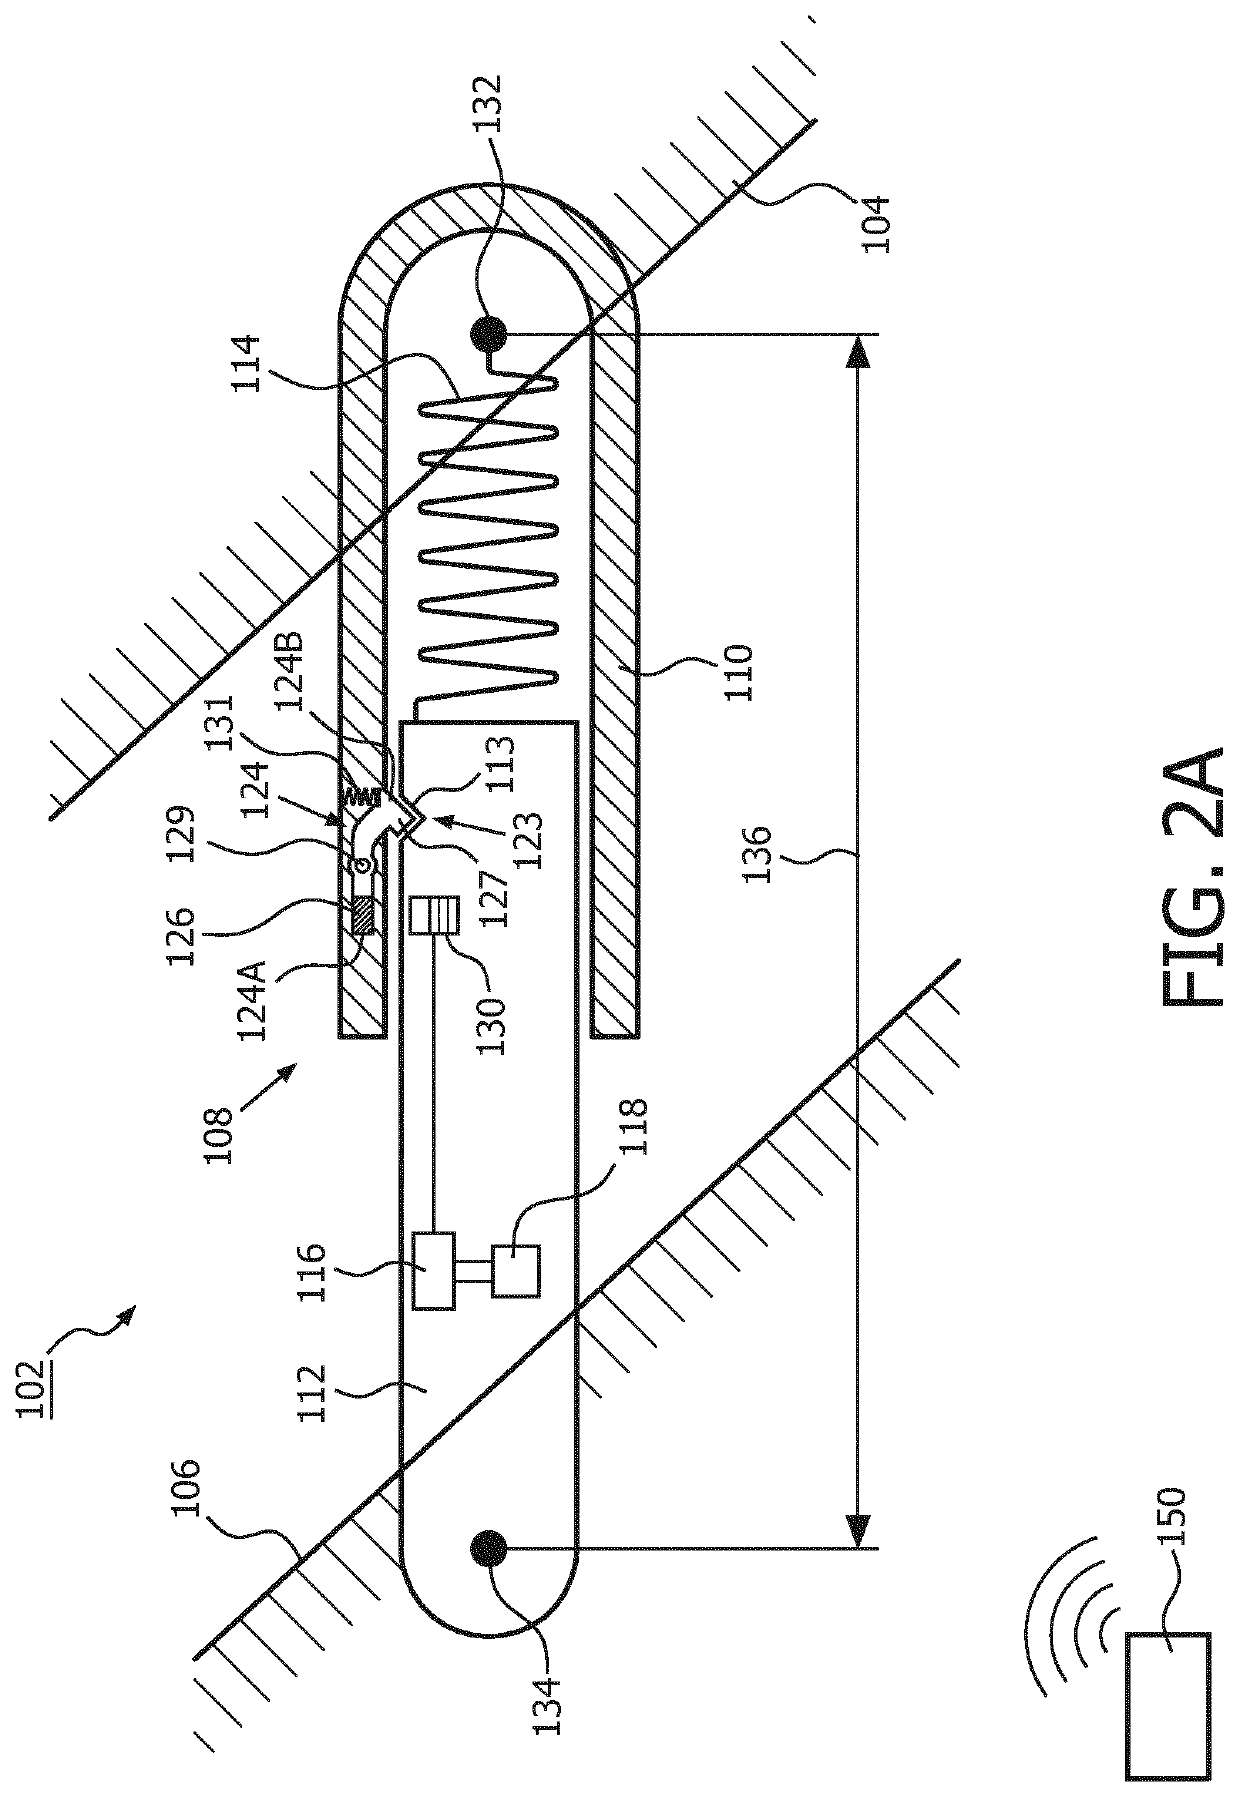 Mandibular advancement device and method of adjusting a dimension of a coupling assembly of a mandibular advancement device